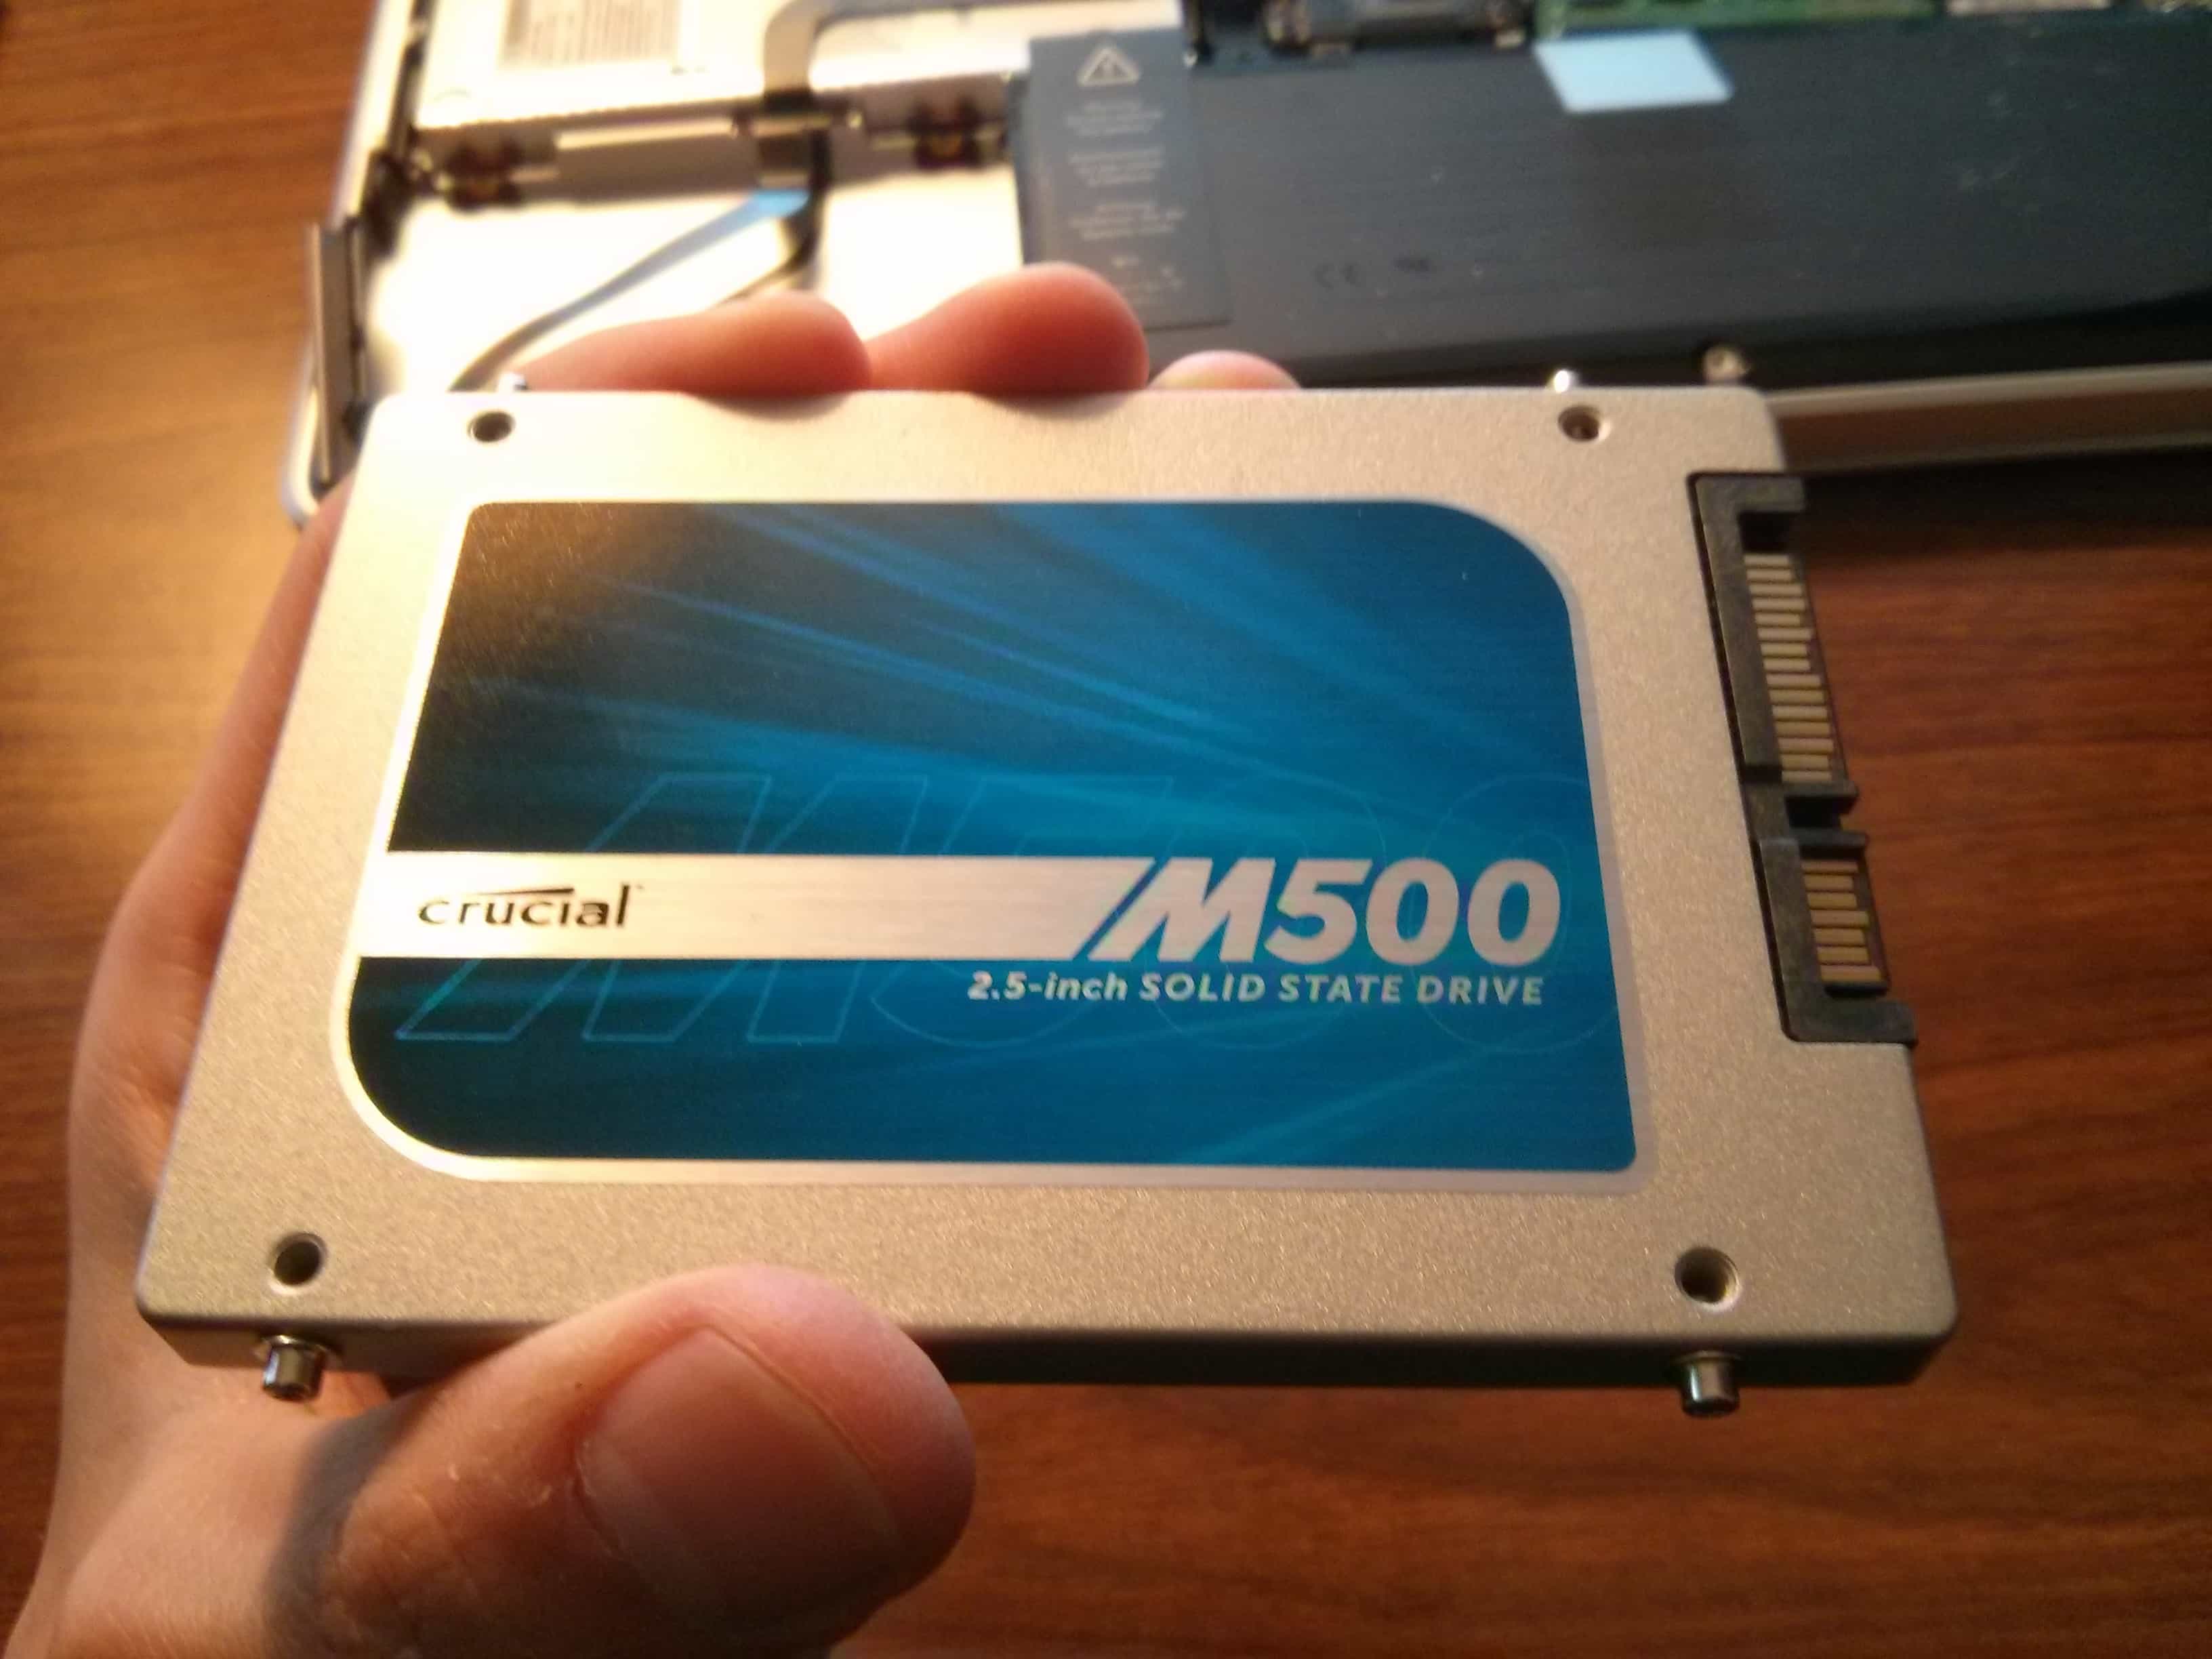 SSD and you will have a brand new PC